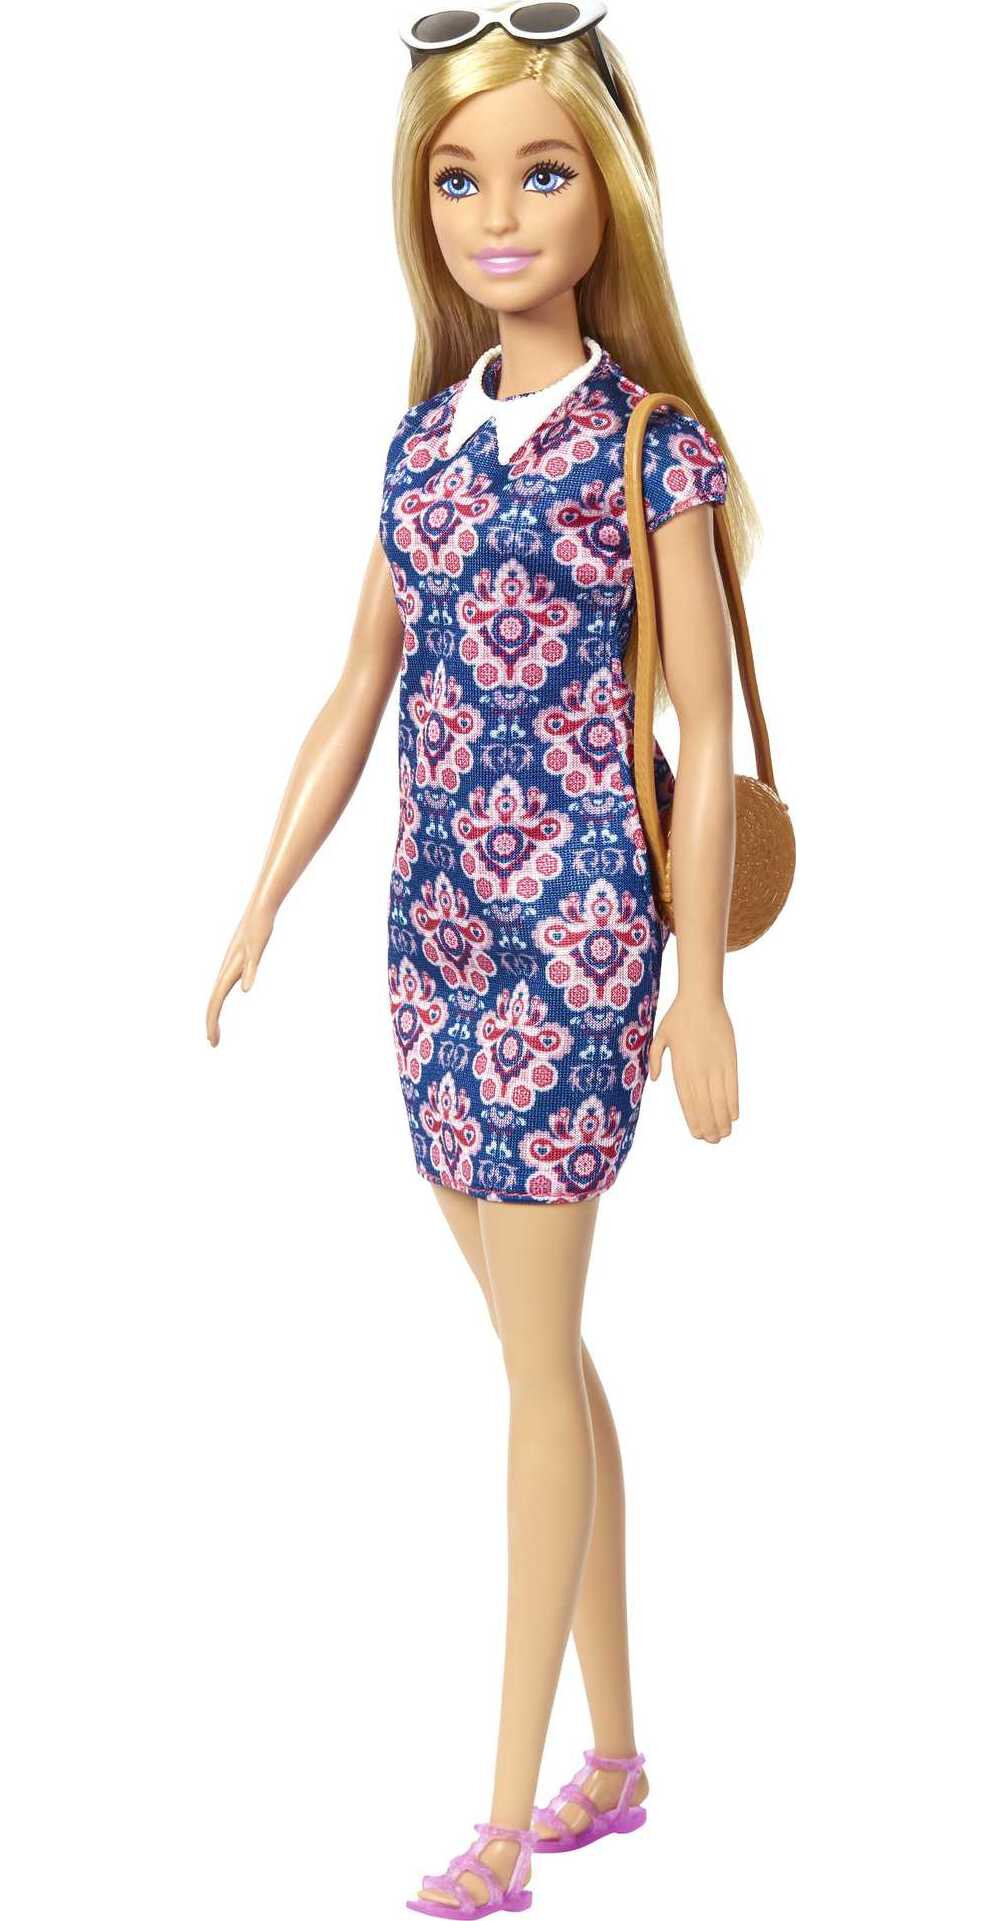 Barbie Doll with 19-Piece Fashion Pack, Clothes & Accessories for 7 Outfits, Blonde Hair - image 2 of 6